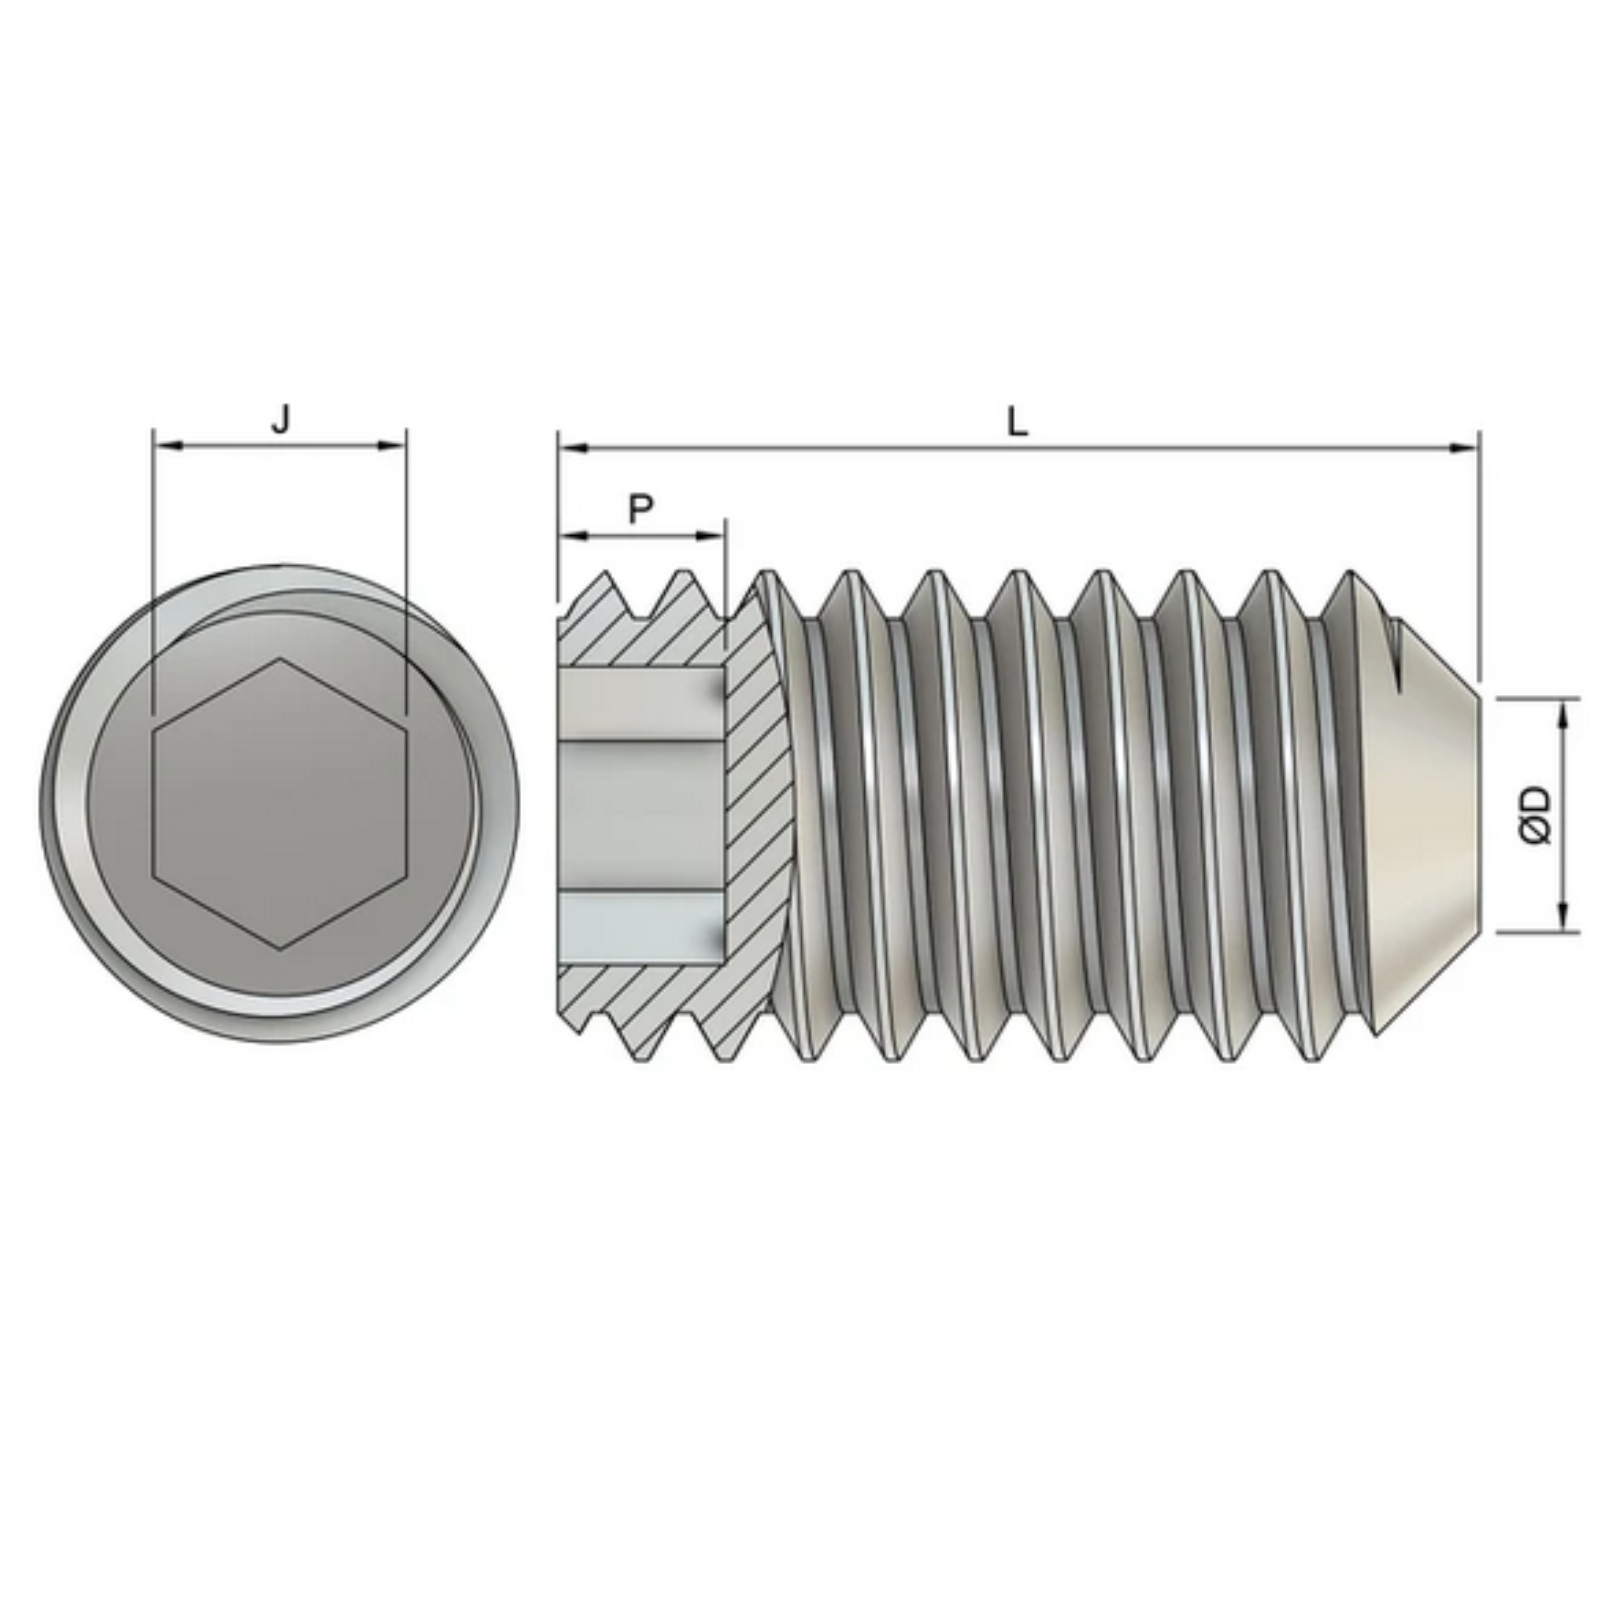 M6 Cup Point Set / Grub Screws (DIN 916) - Stainless Steel (A2)